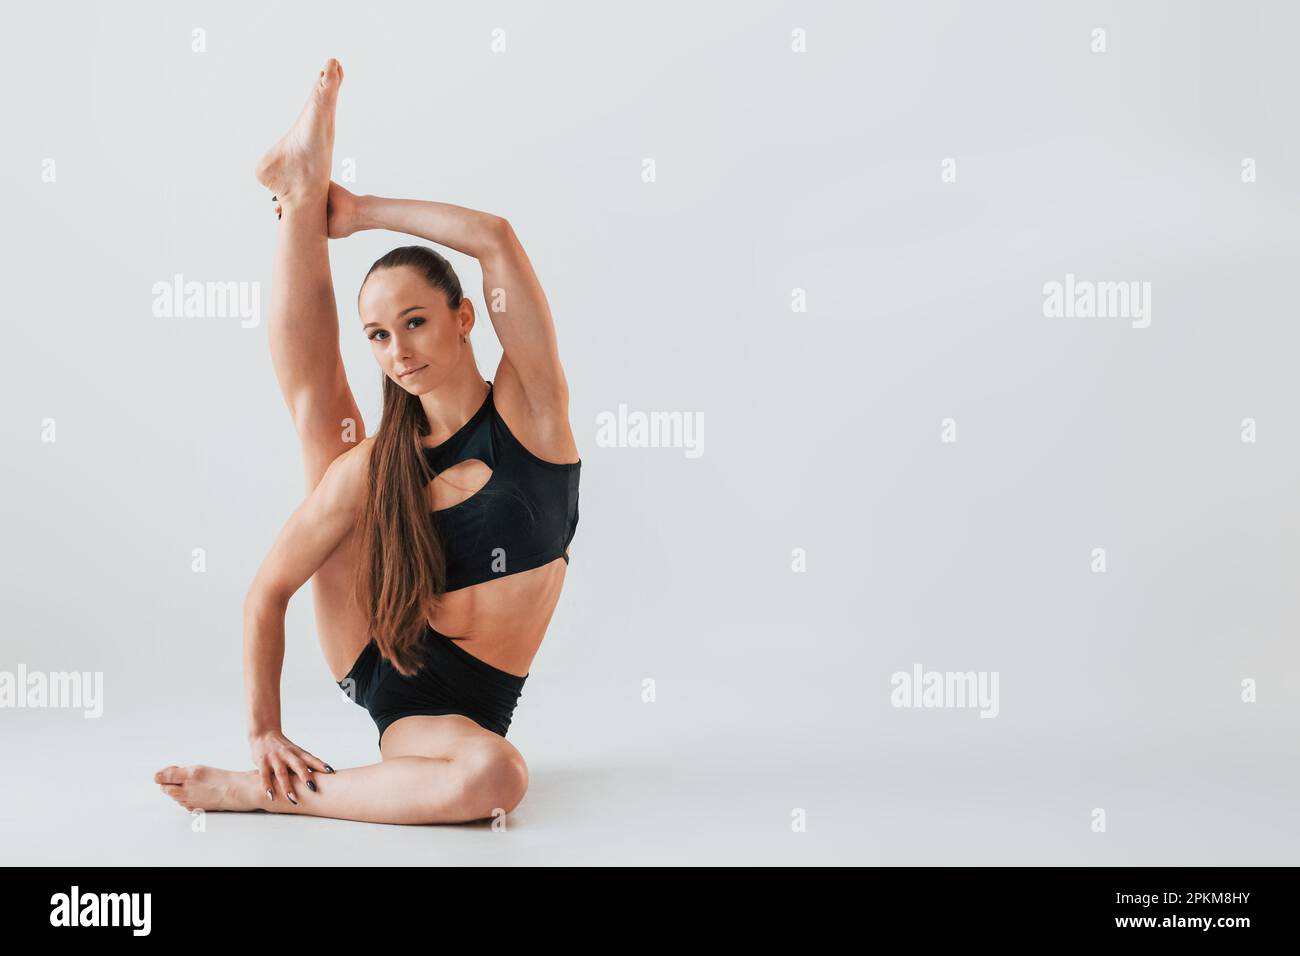 Flexibility of the body. Young woman in sportive clothes doing gymnastics indoors. Stock Photo